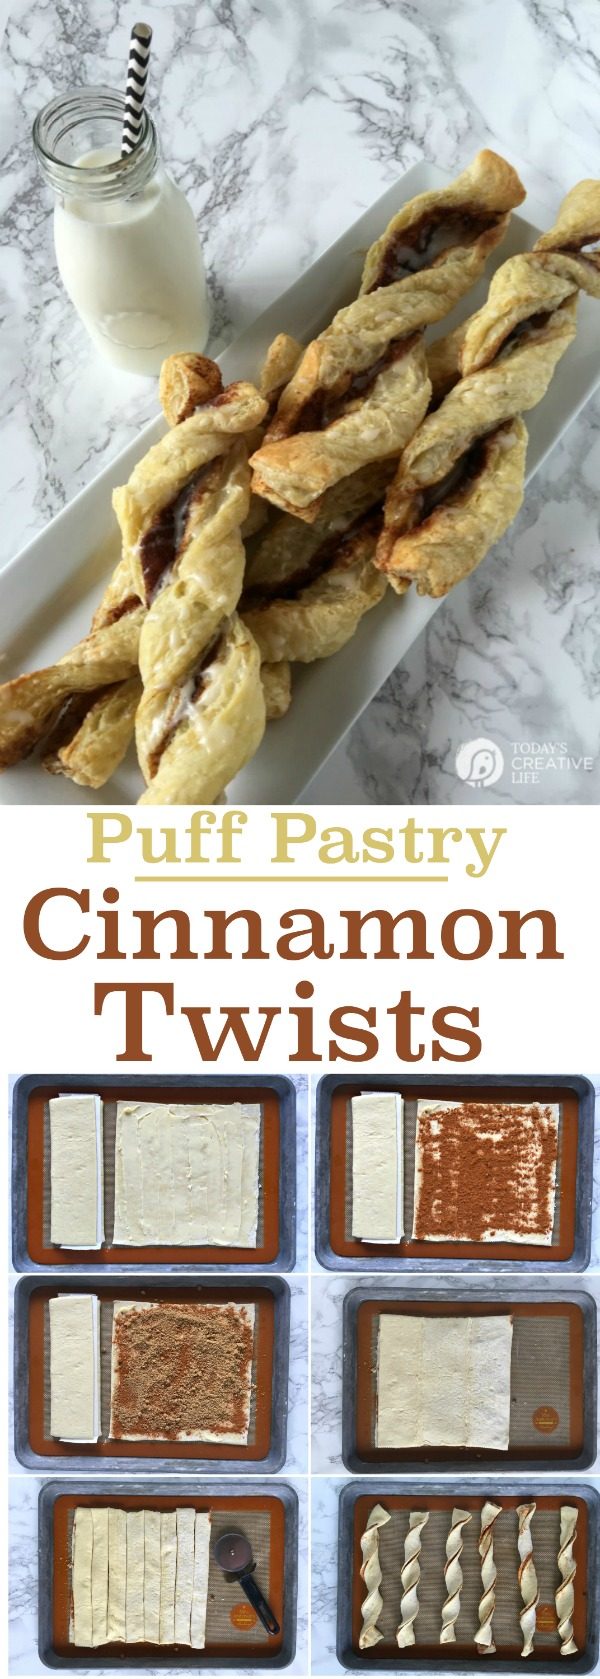 Puff Pastry Cinnamon Twists | The magic of puff pastry makes you feel like a real baker! Whip up a batch of these Cinnamon Twists for a quick snack or breakfast. See the recipe on TodaysCreativeLife.com 